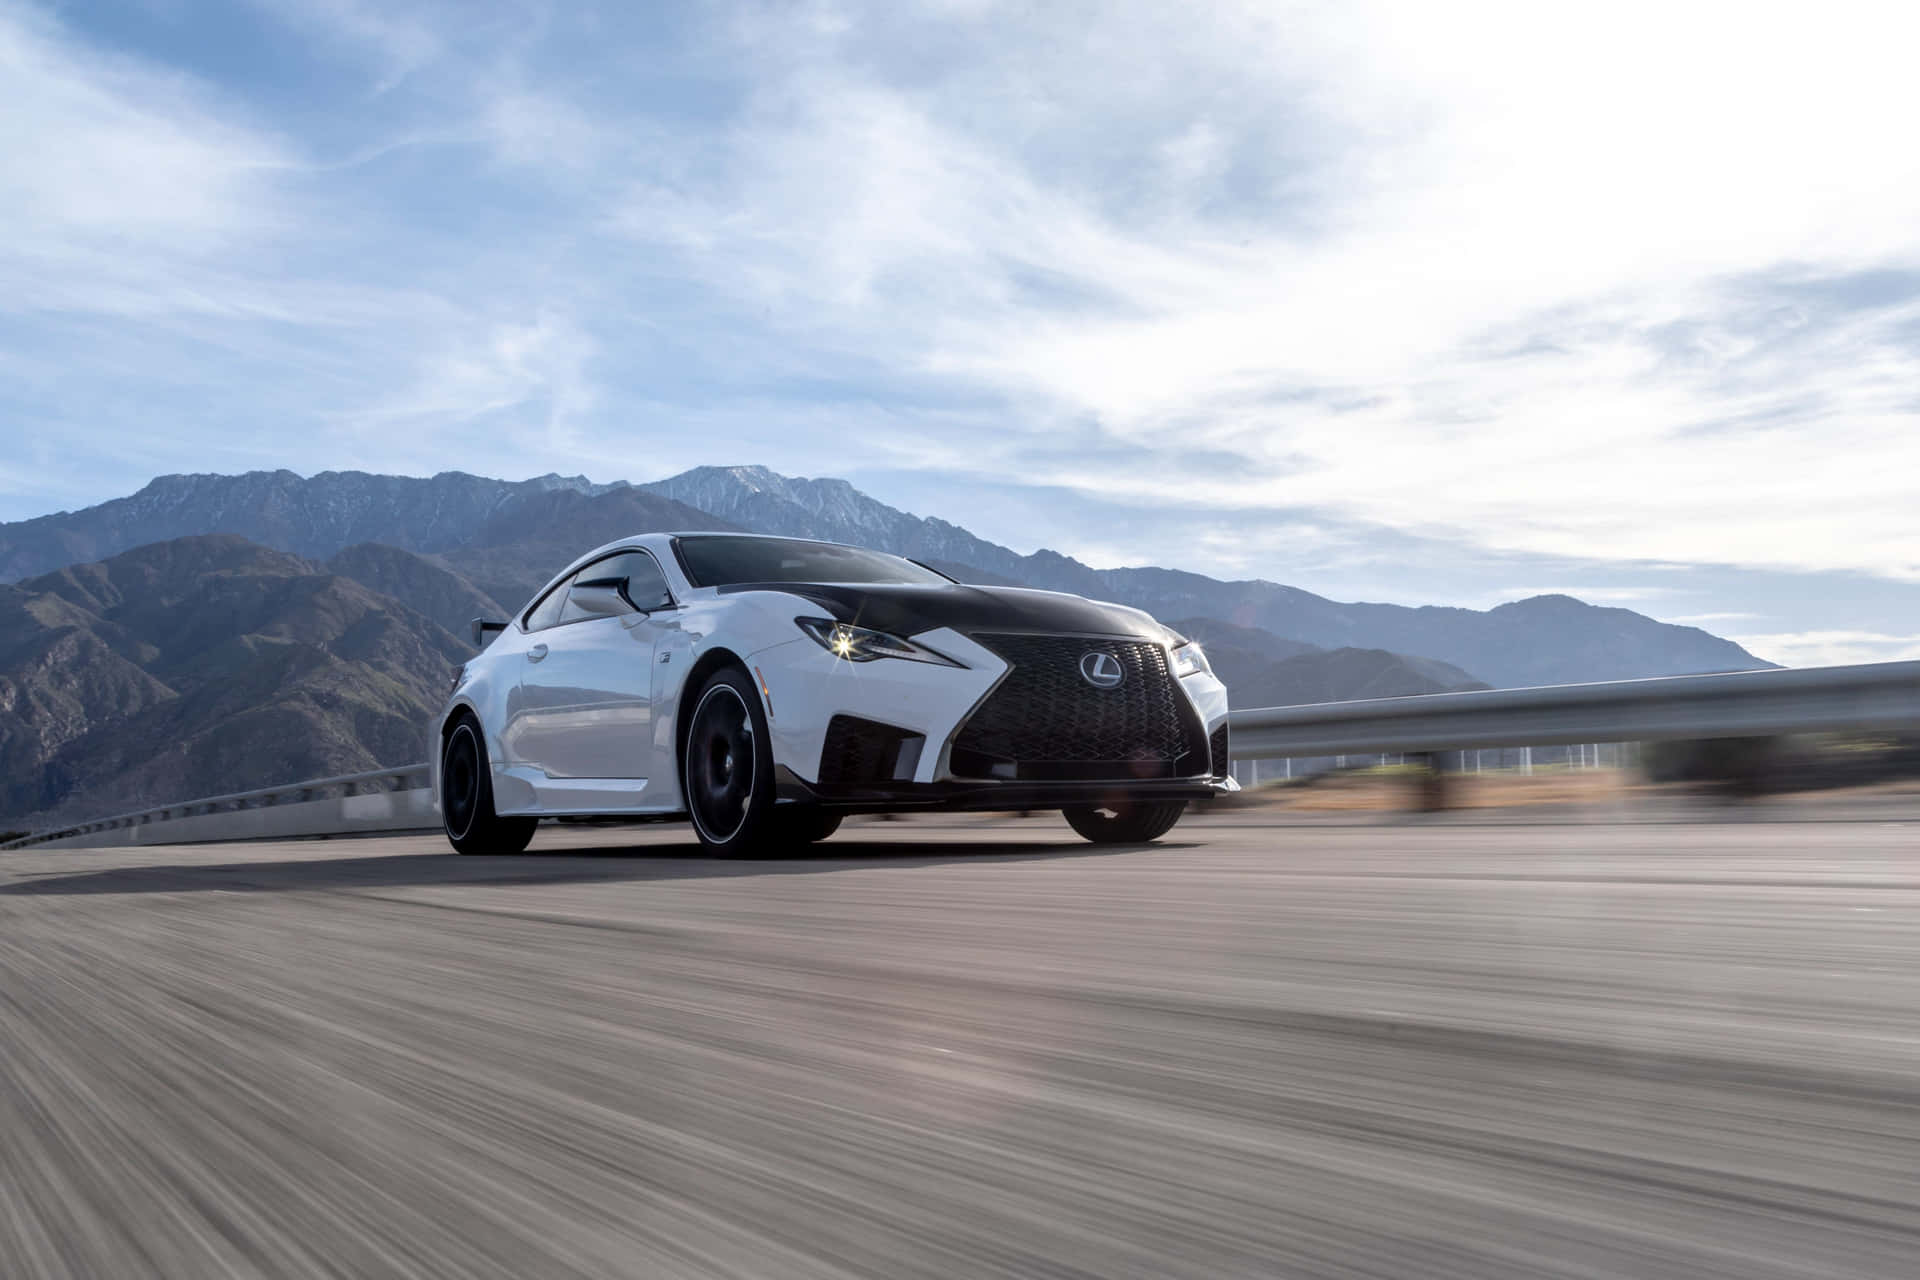 The Lexus Rc F Sports Car Driving On A Mountain Road Background